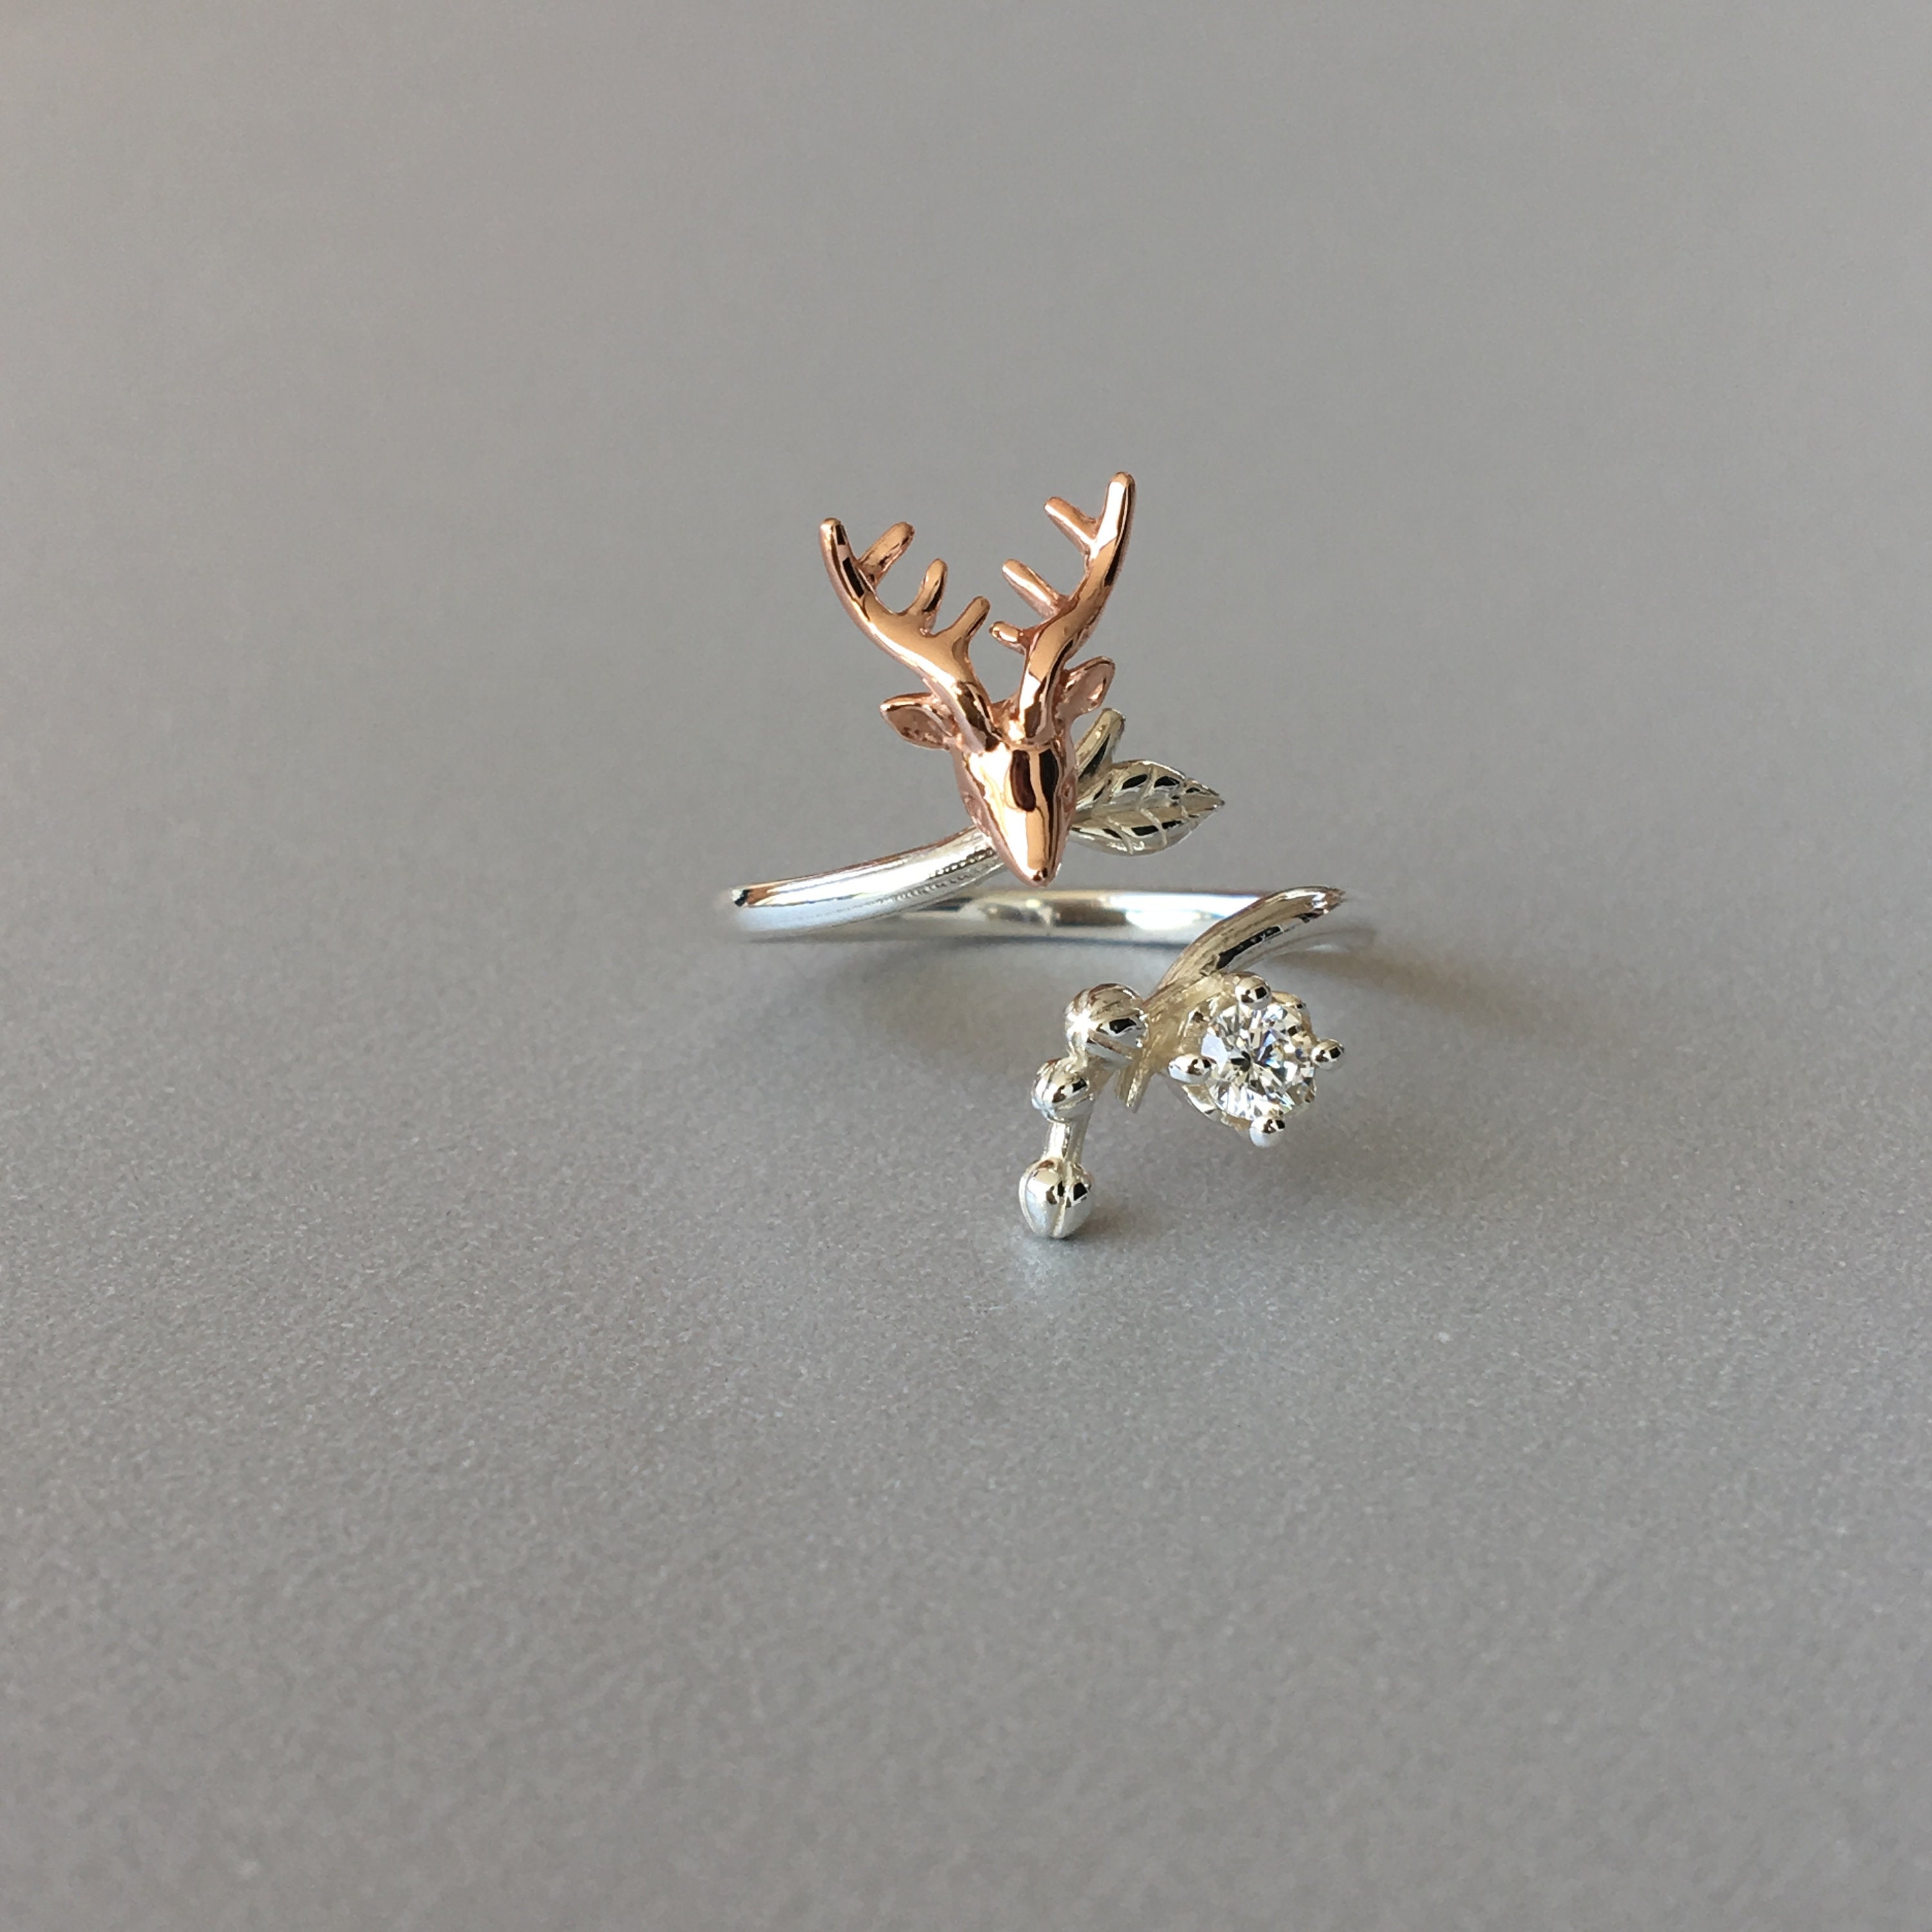 16g Pair of Silver Plated Antlers